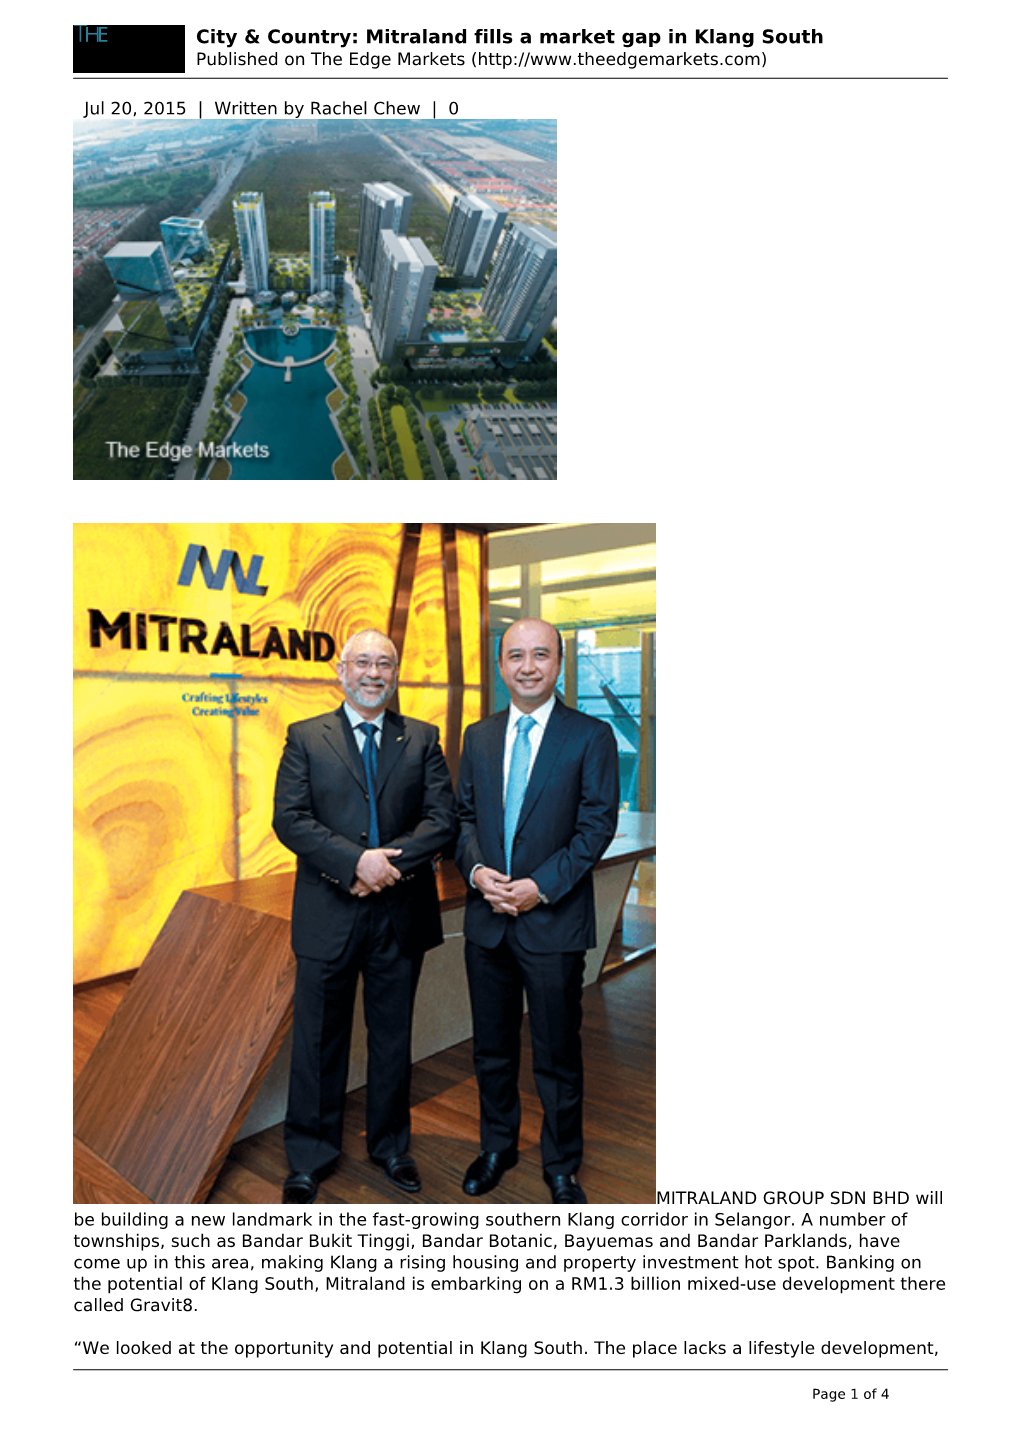 Mitraland Fills a Market Gap in Klang South Published on the Edge Markets (